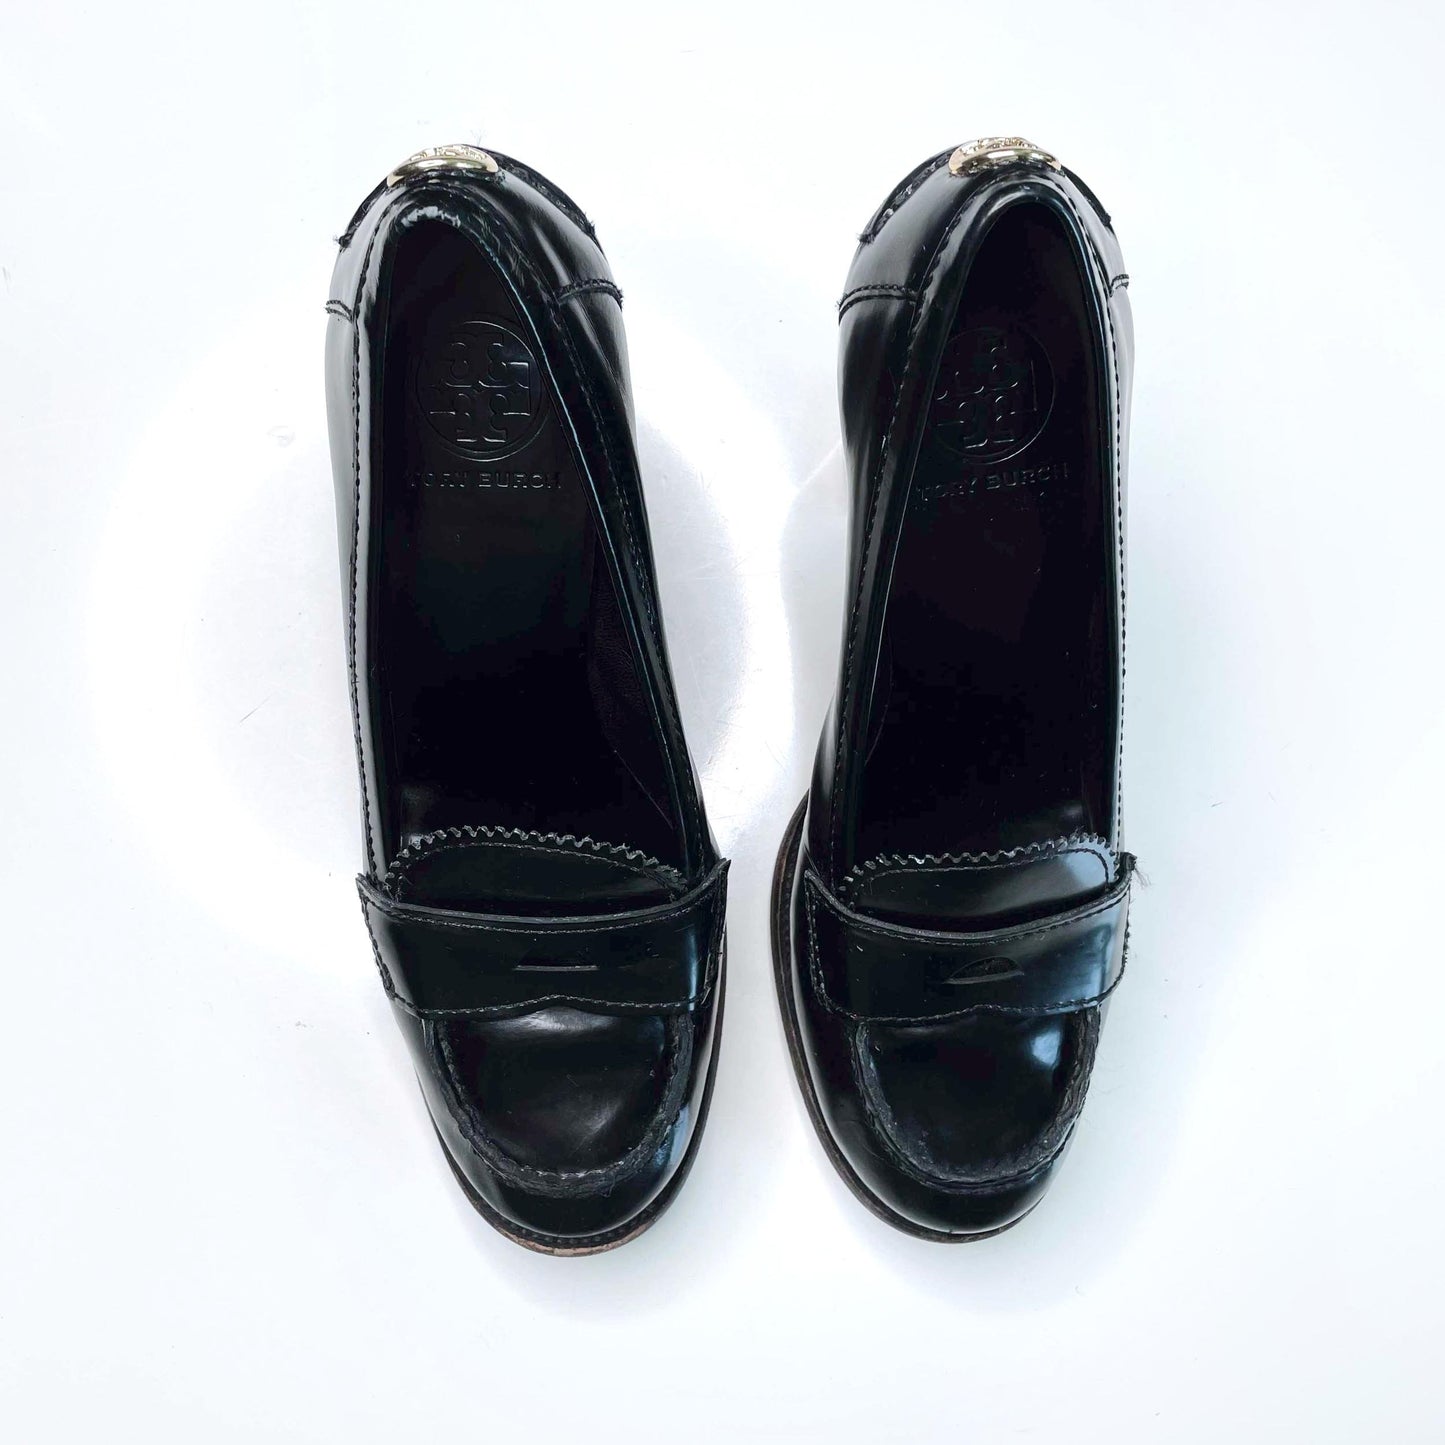 tory burch patent leather heeled loafer - size 8